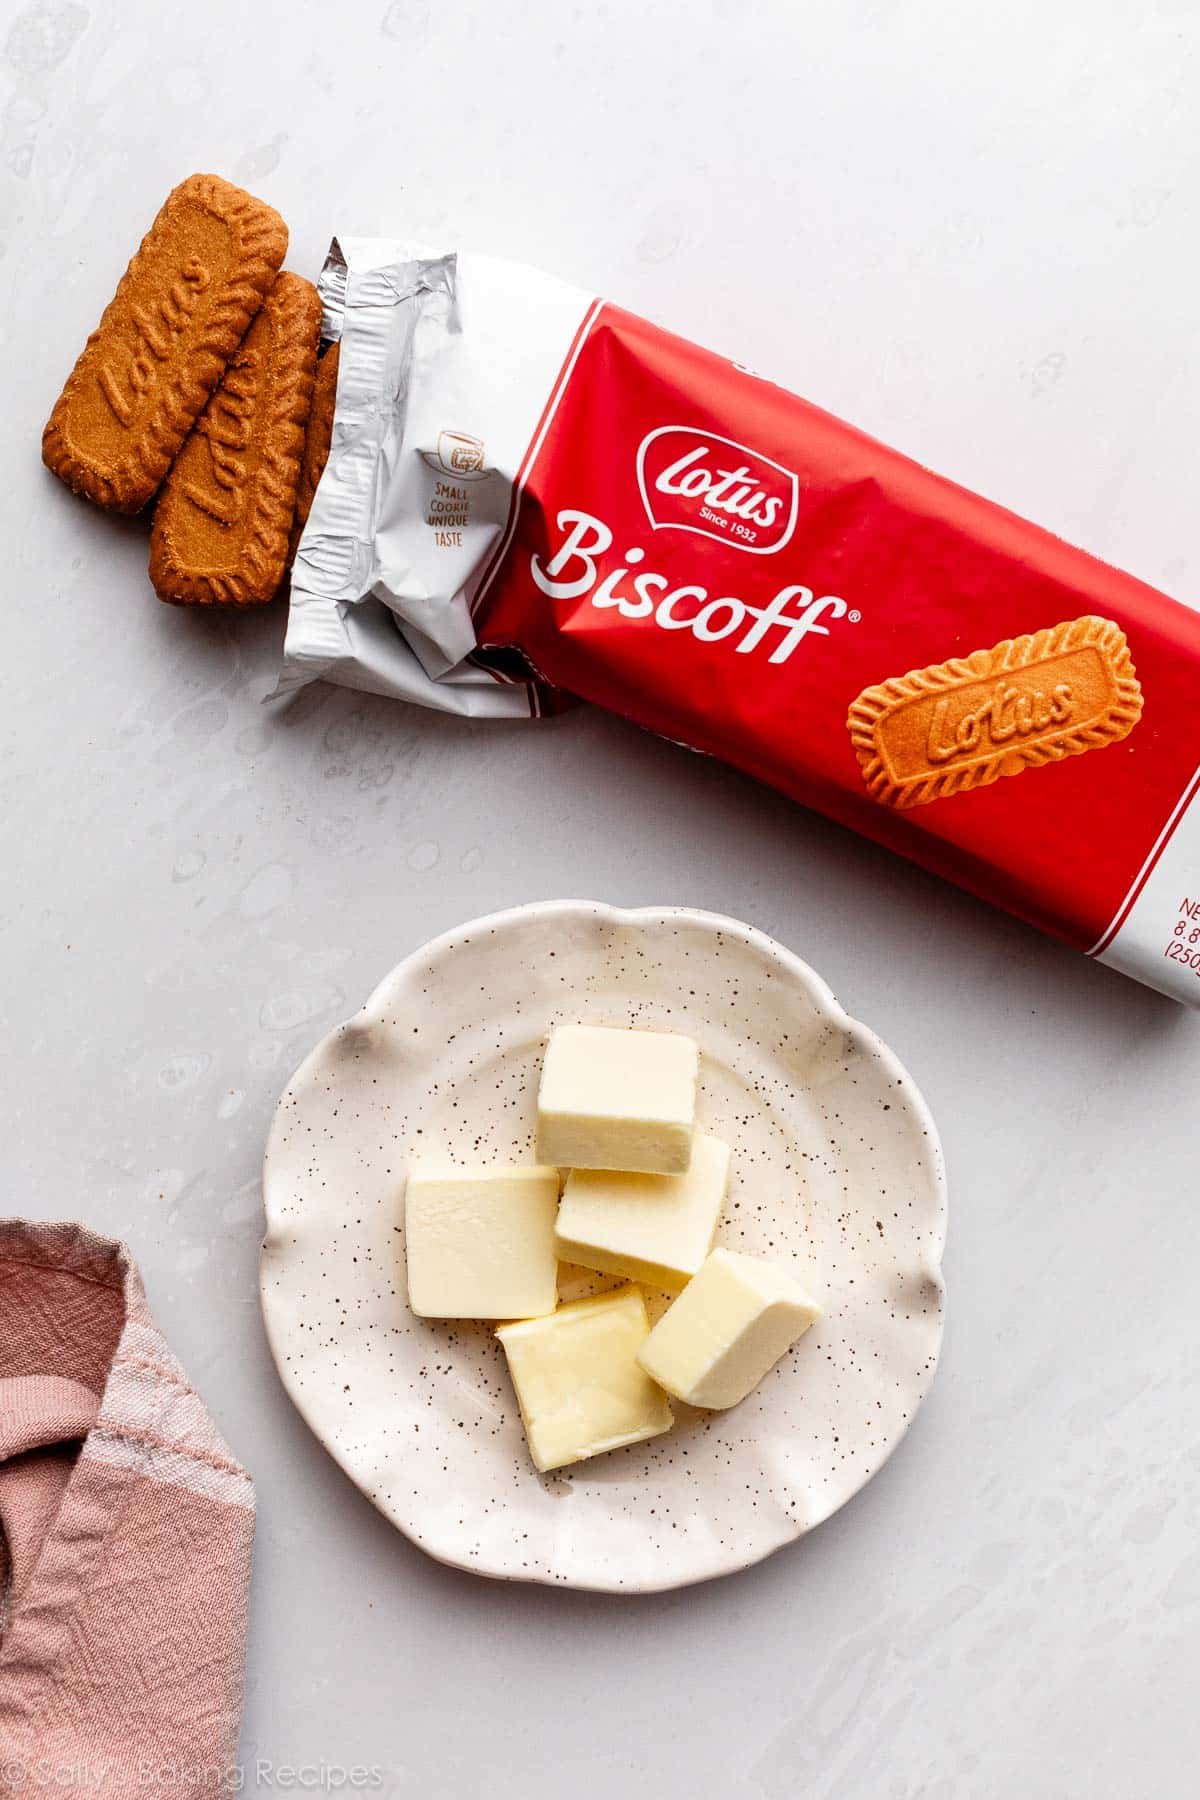 dish of slices of butter and a package of Lotus brand Biscoff cookies.